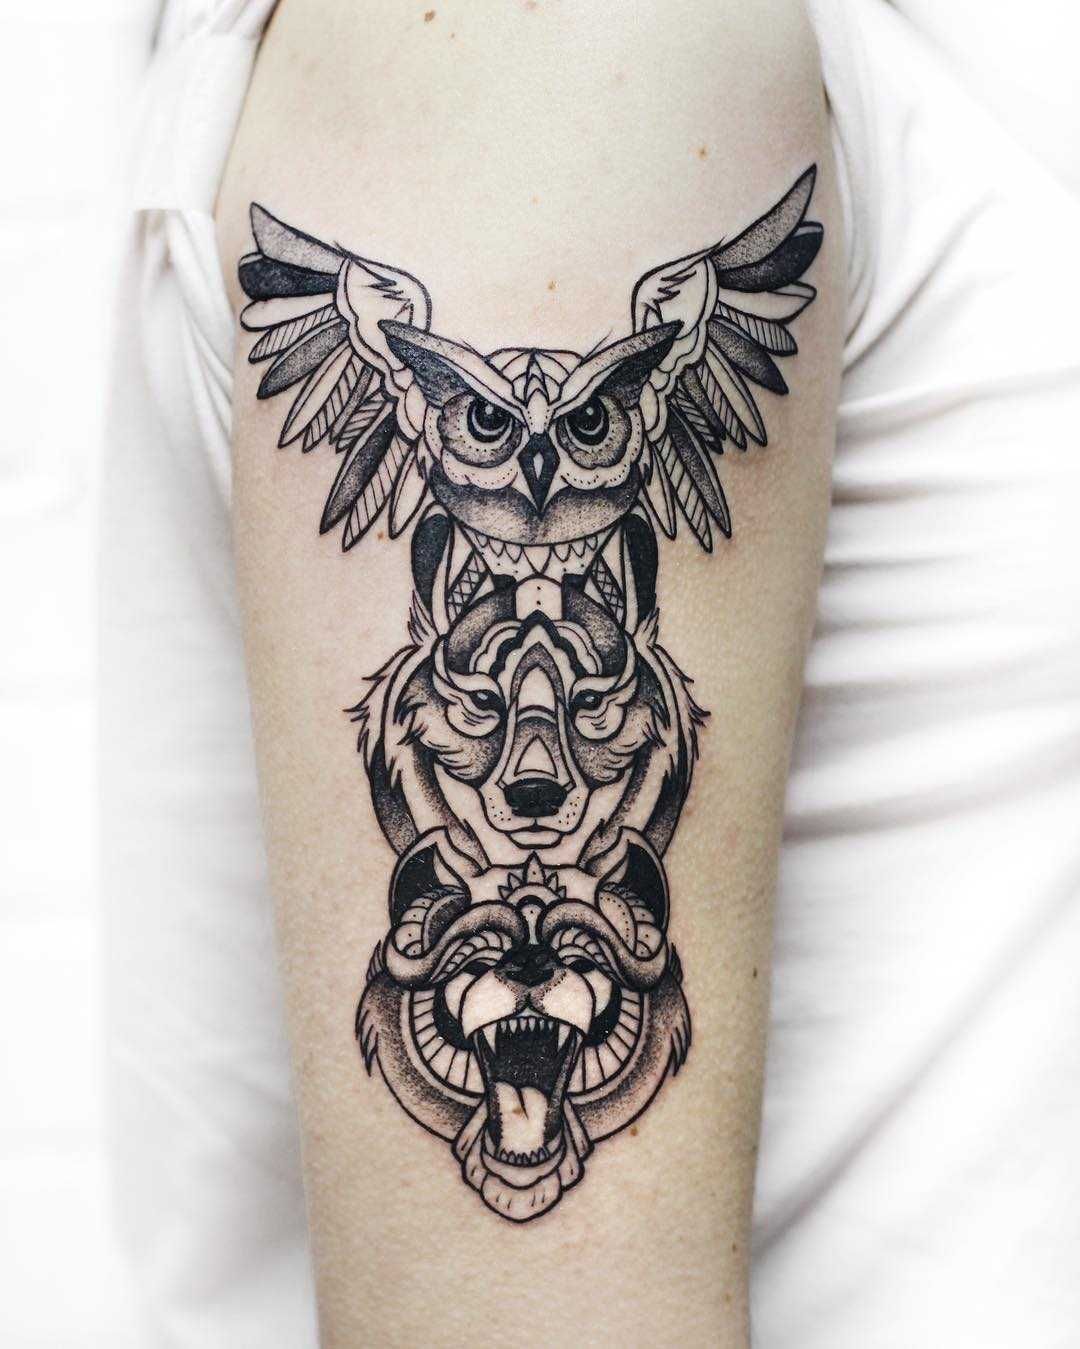 Meaning of Totem Tattoo | BlendUp